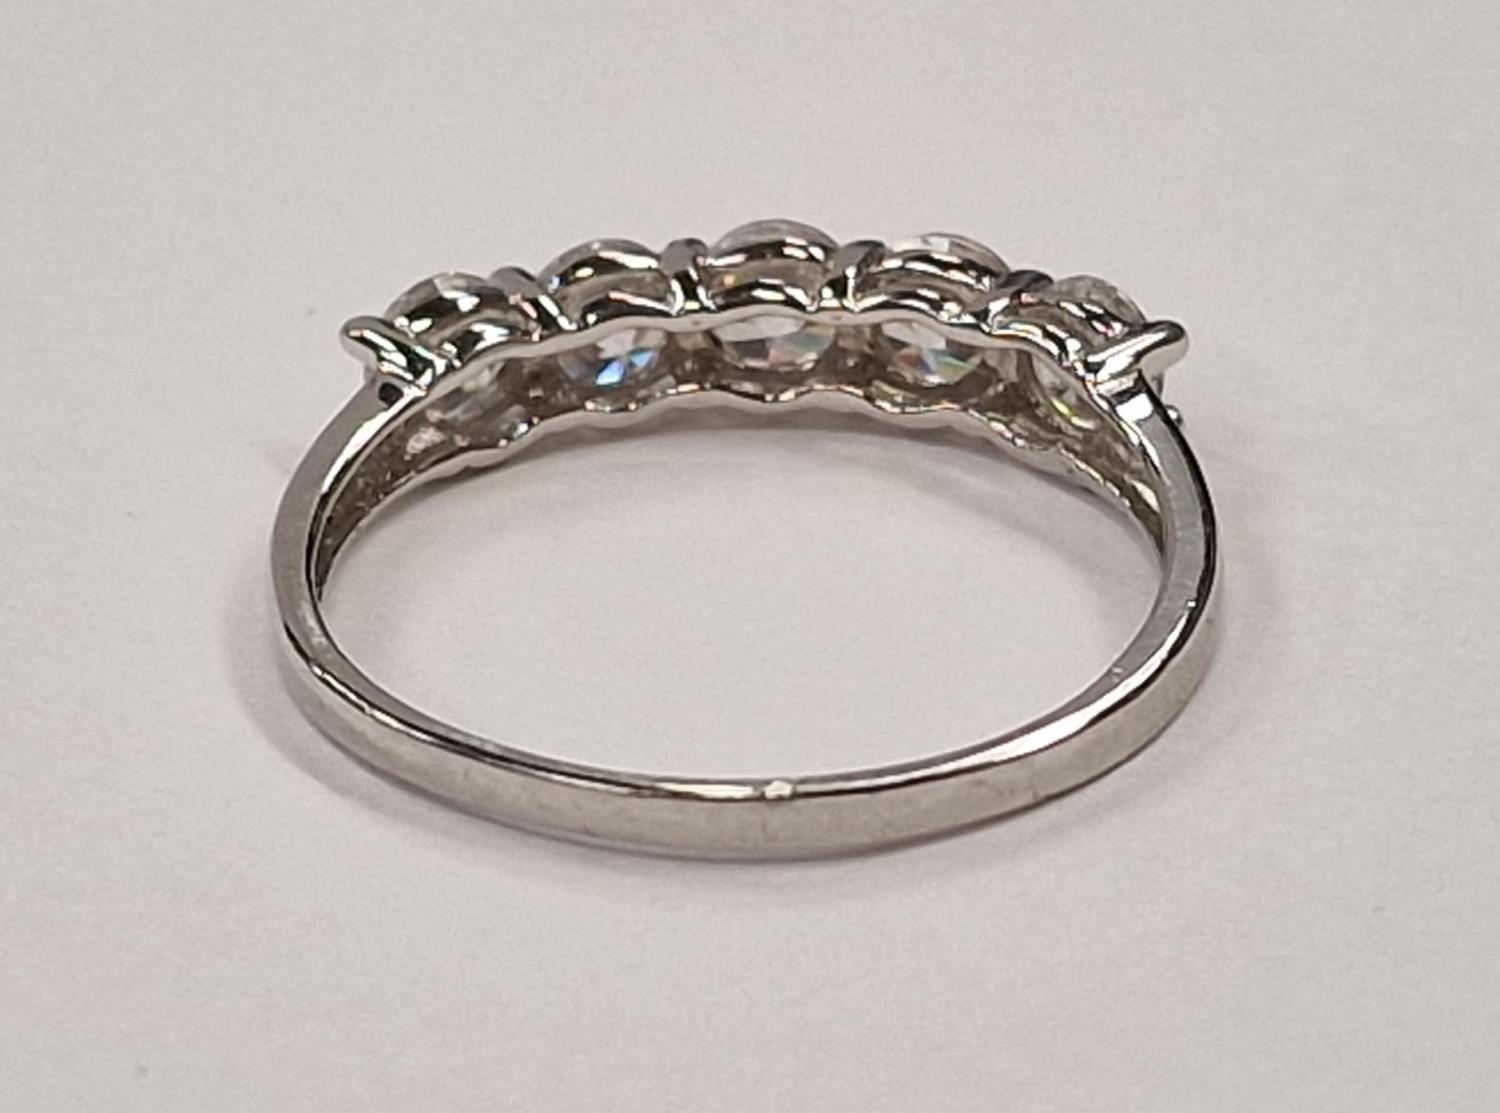 A sparkling 925 silver 5 stone CZ ring Size R (D1) - Image 2 of 3